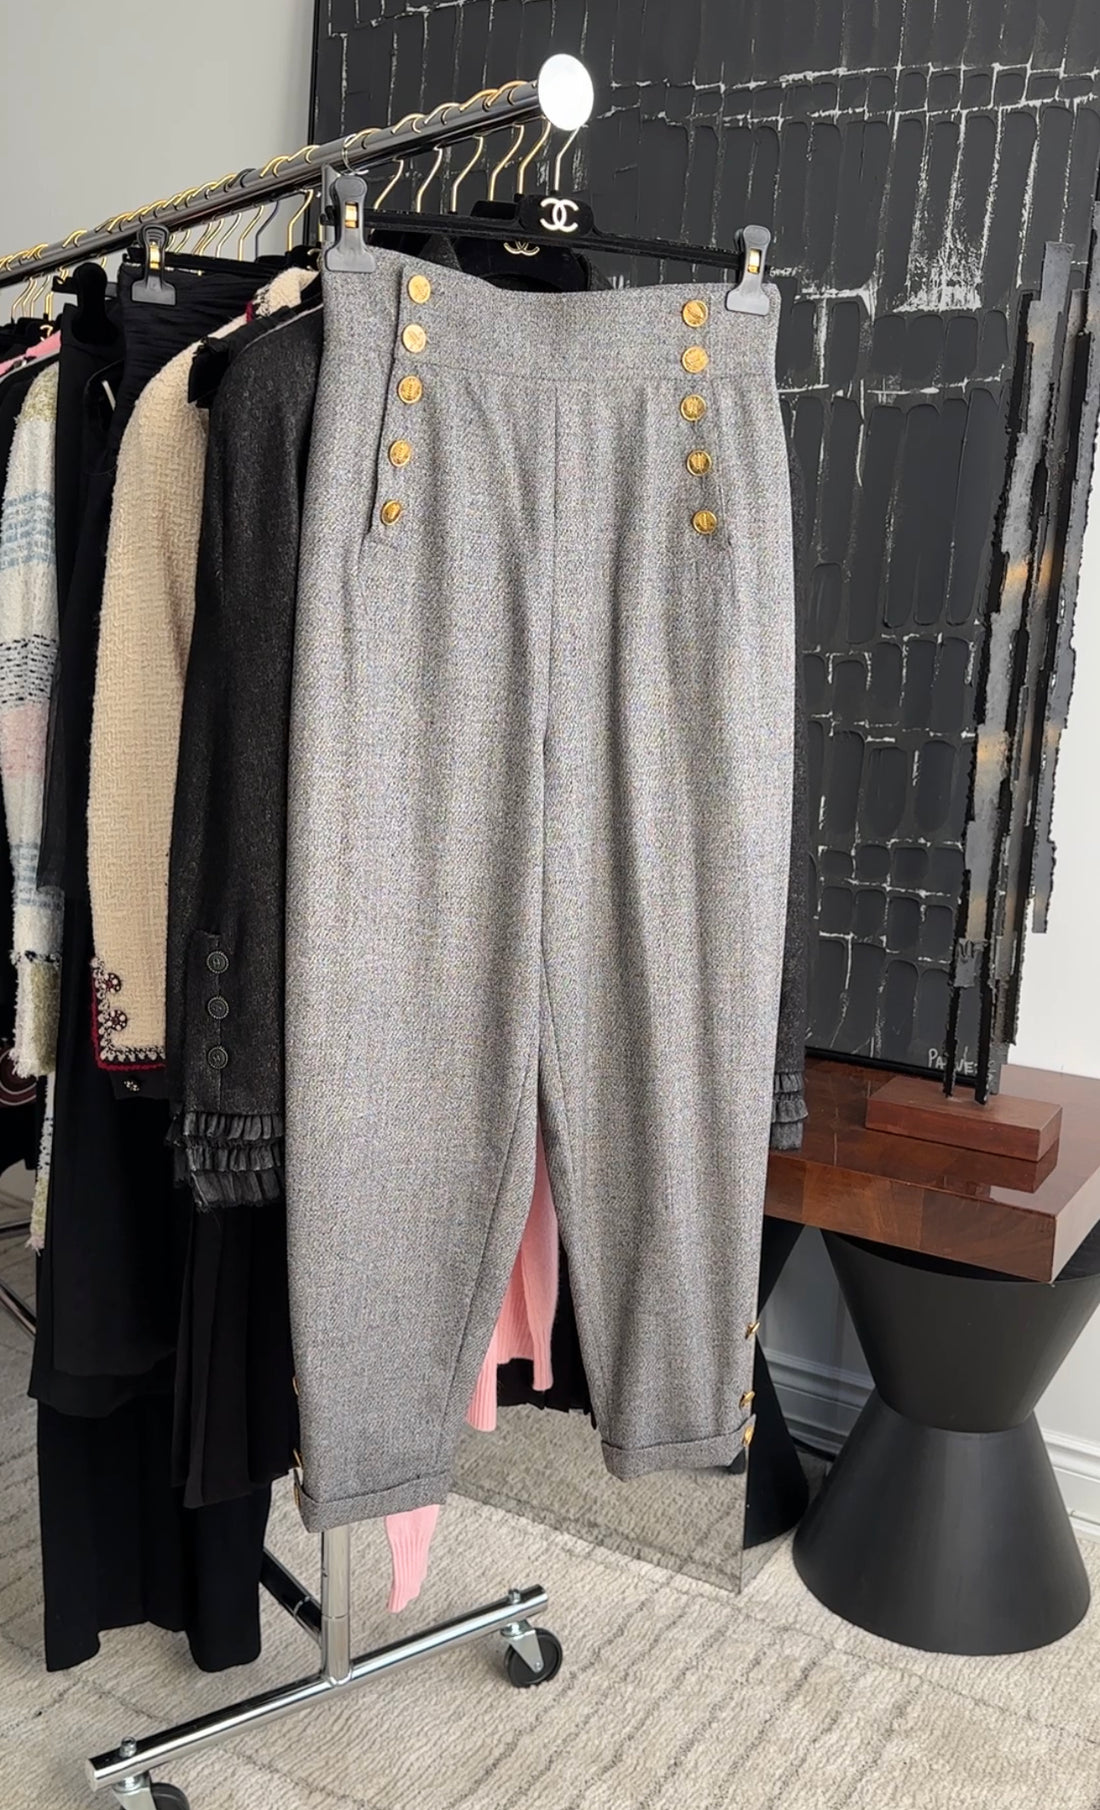 Chanel Vintage 1987 Grey high Waist Pants with Gold Wheat CC Buttons - FR42 / M